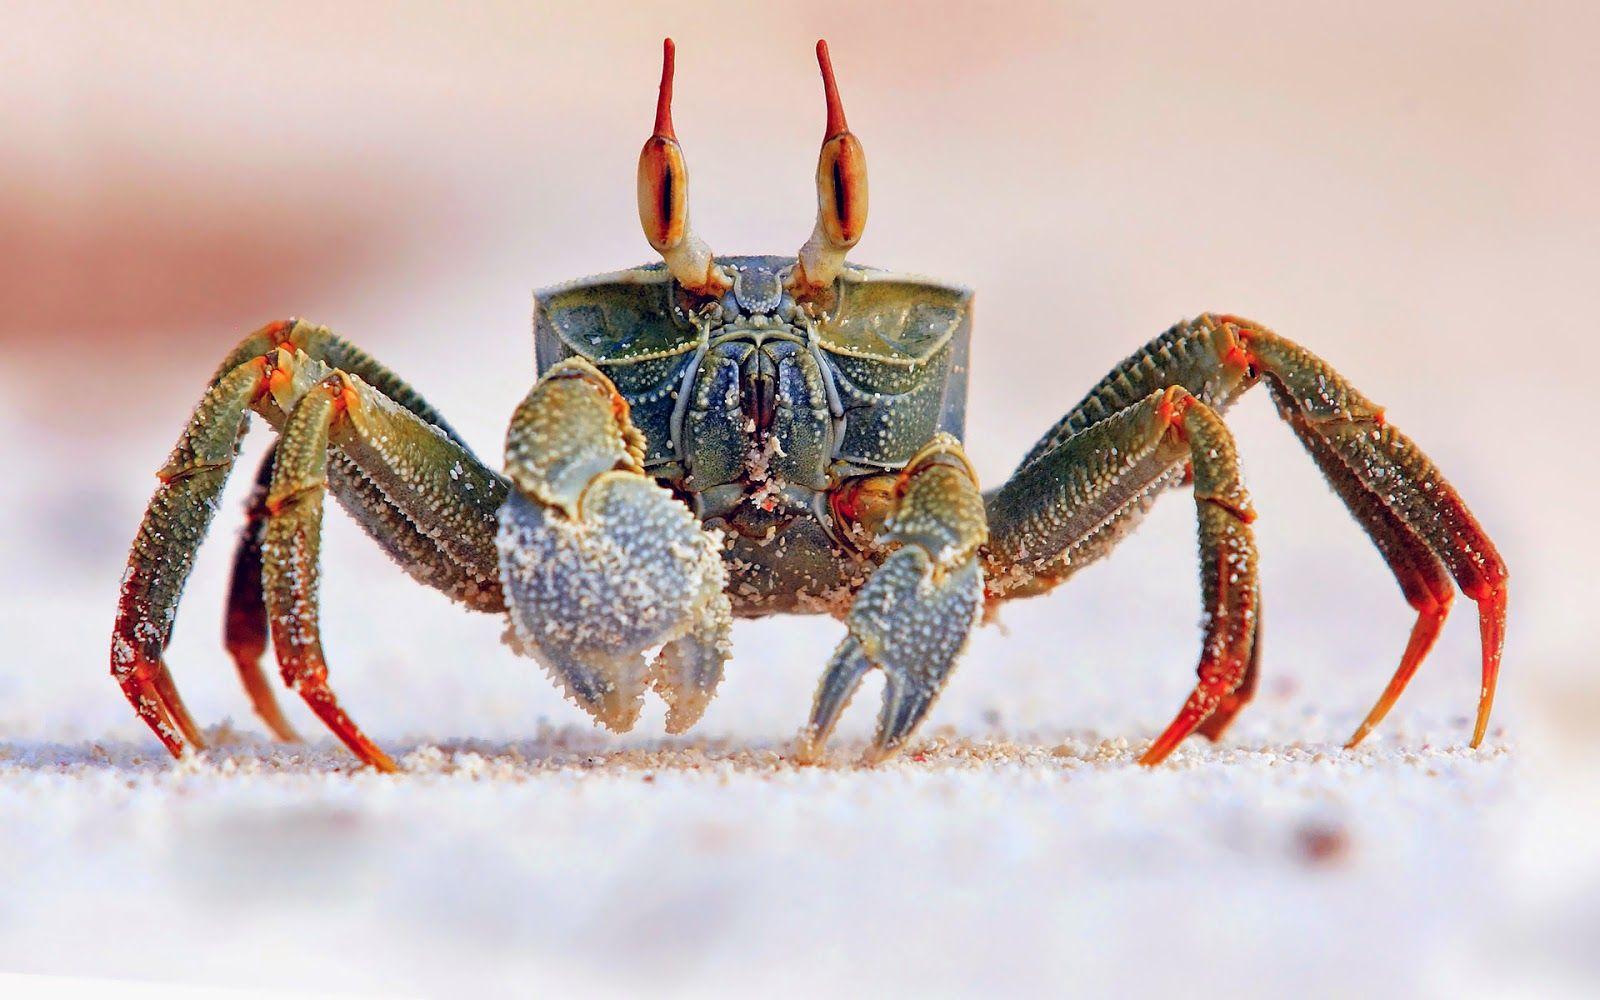 Wallpaper ID 781243  land 1080P no people cra sand sea life brown  crustacean crustaceans one animal crabs animals red closeup crab  sunlight nature sea outdoors free download